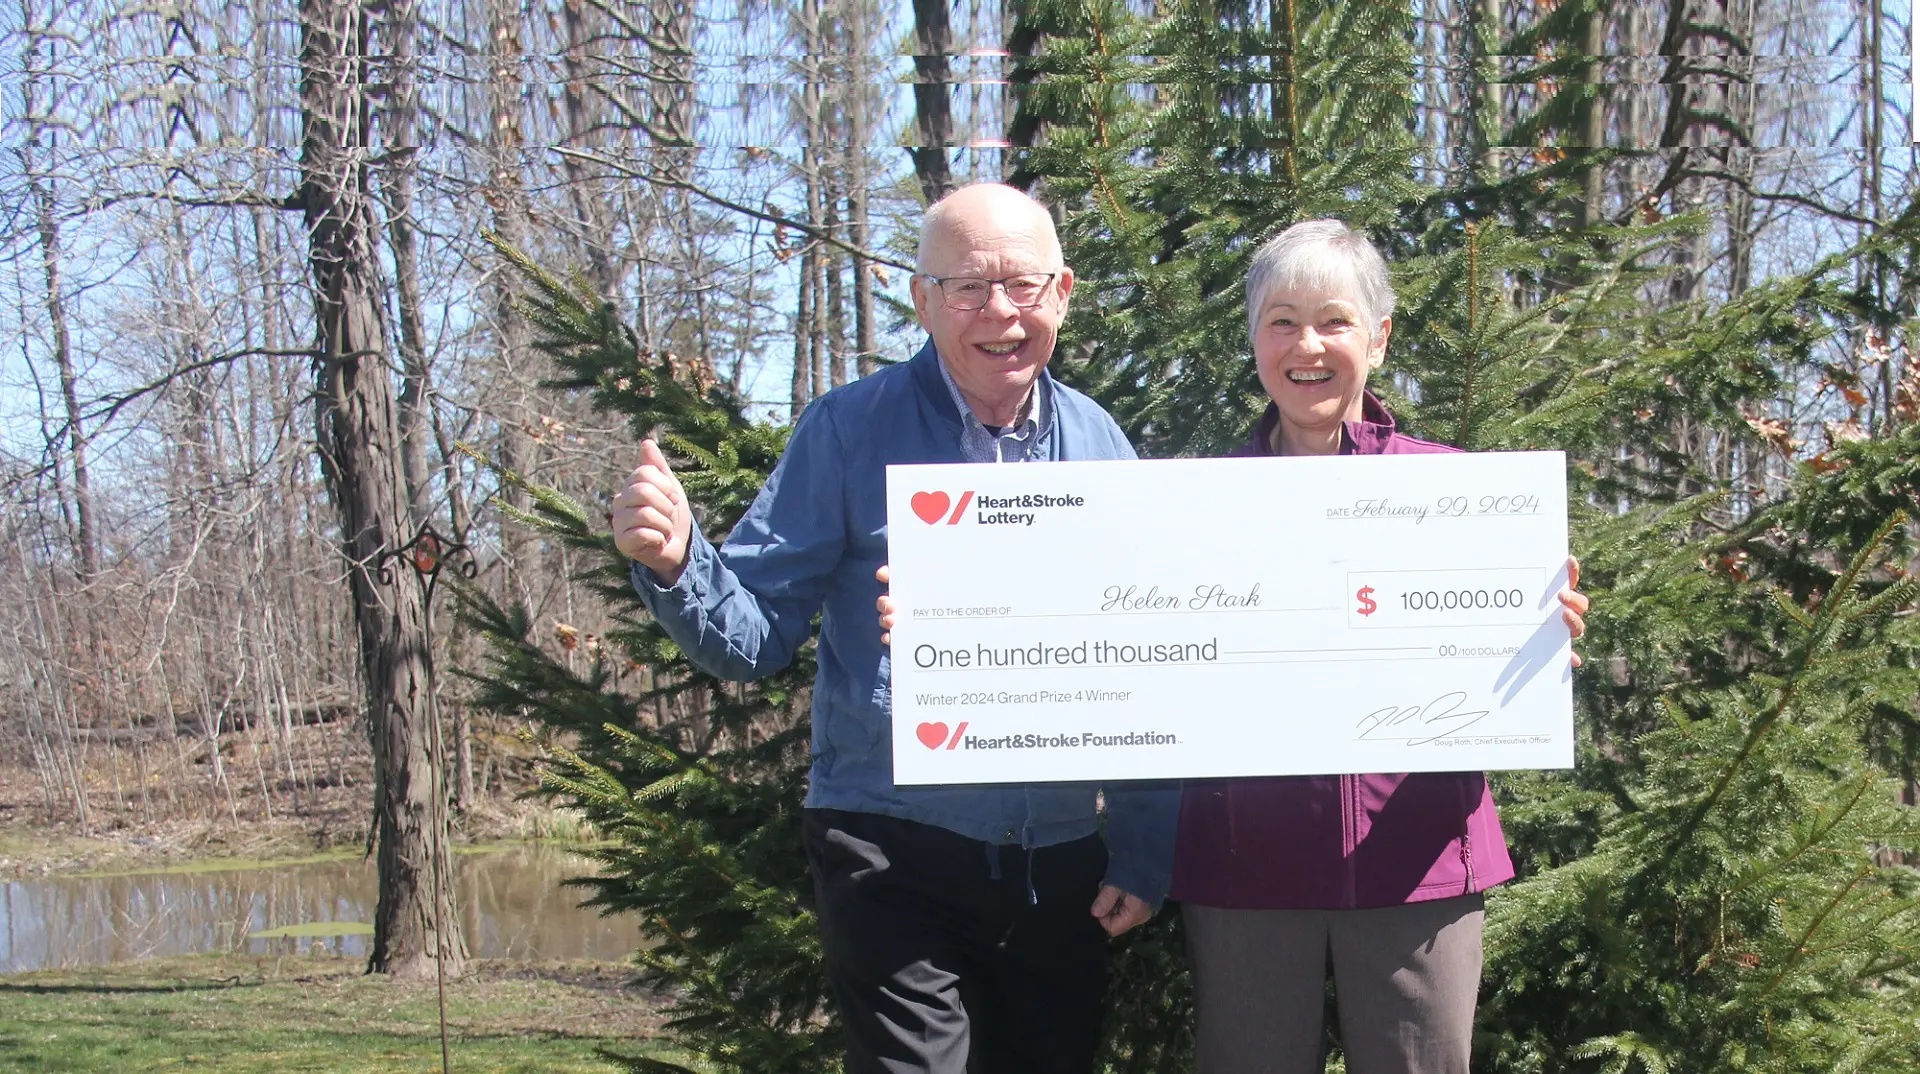 Helen Stark and her husband hold a giant cheque for $100,000